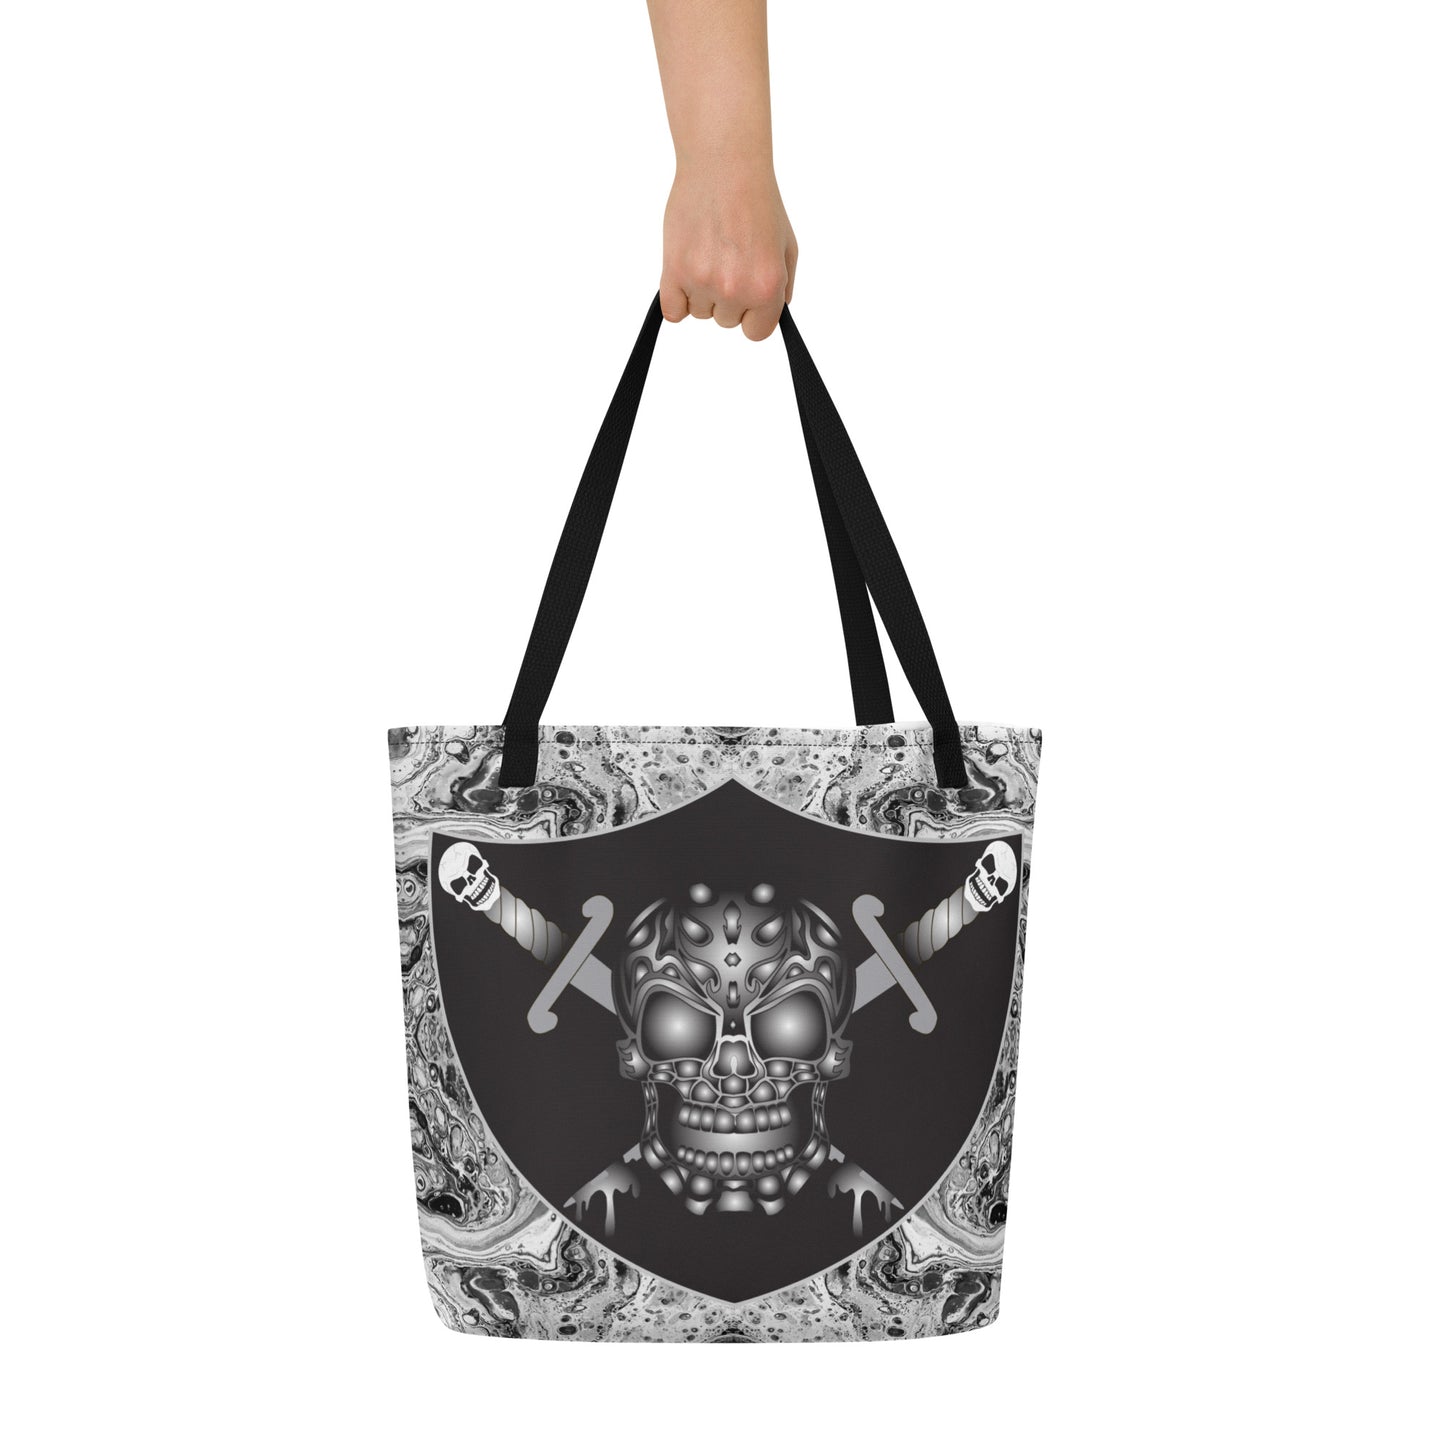 All-Over Print Large Tote Bag - SW-010